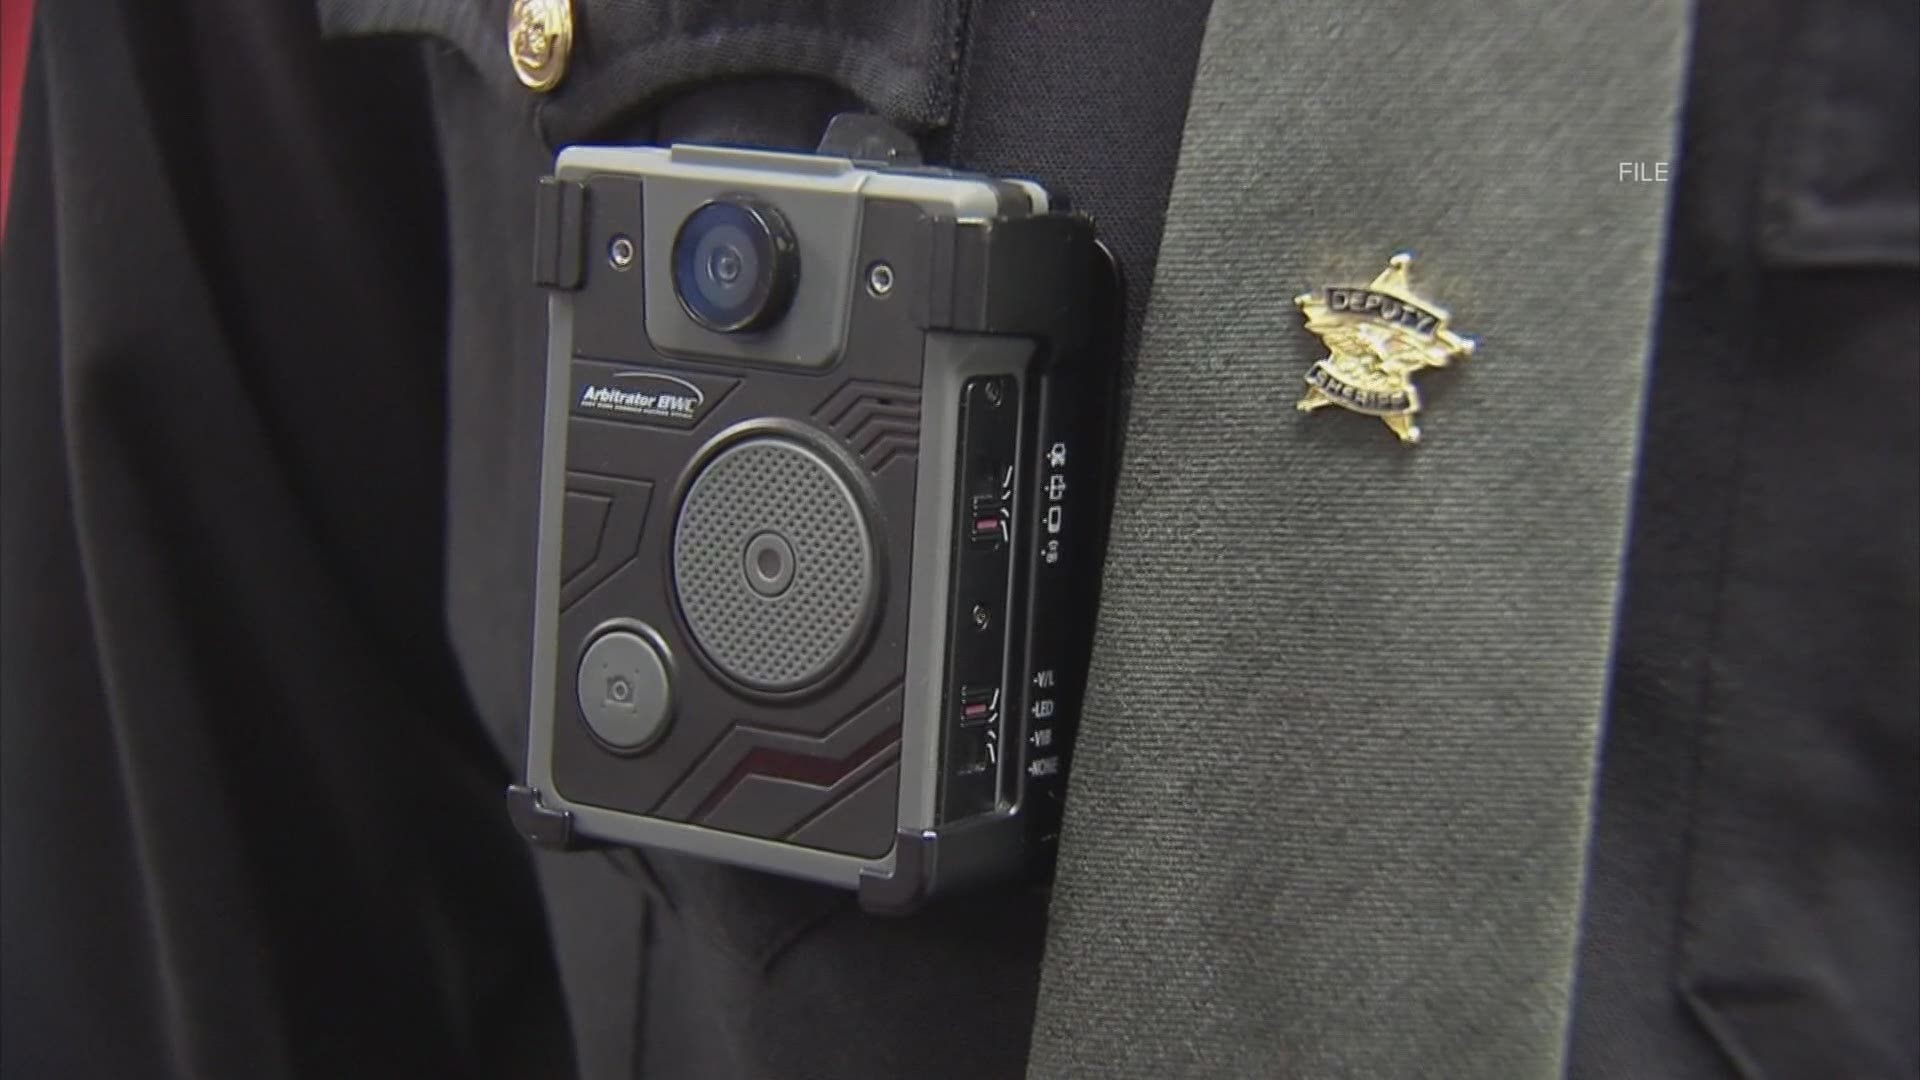 Gov. DeWine announced $10 million will go to providing body cameras for local law enforcement and $1 million will go toward recruitment and retention.